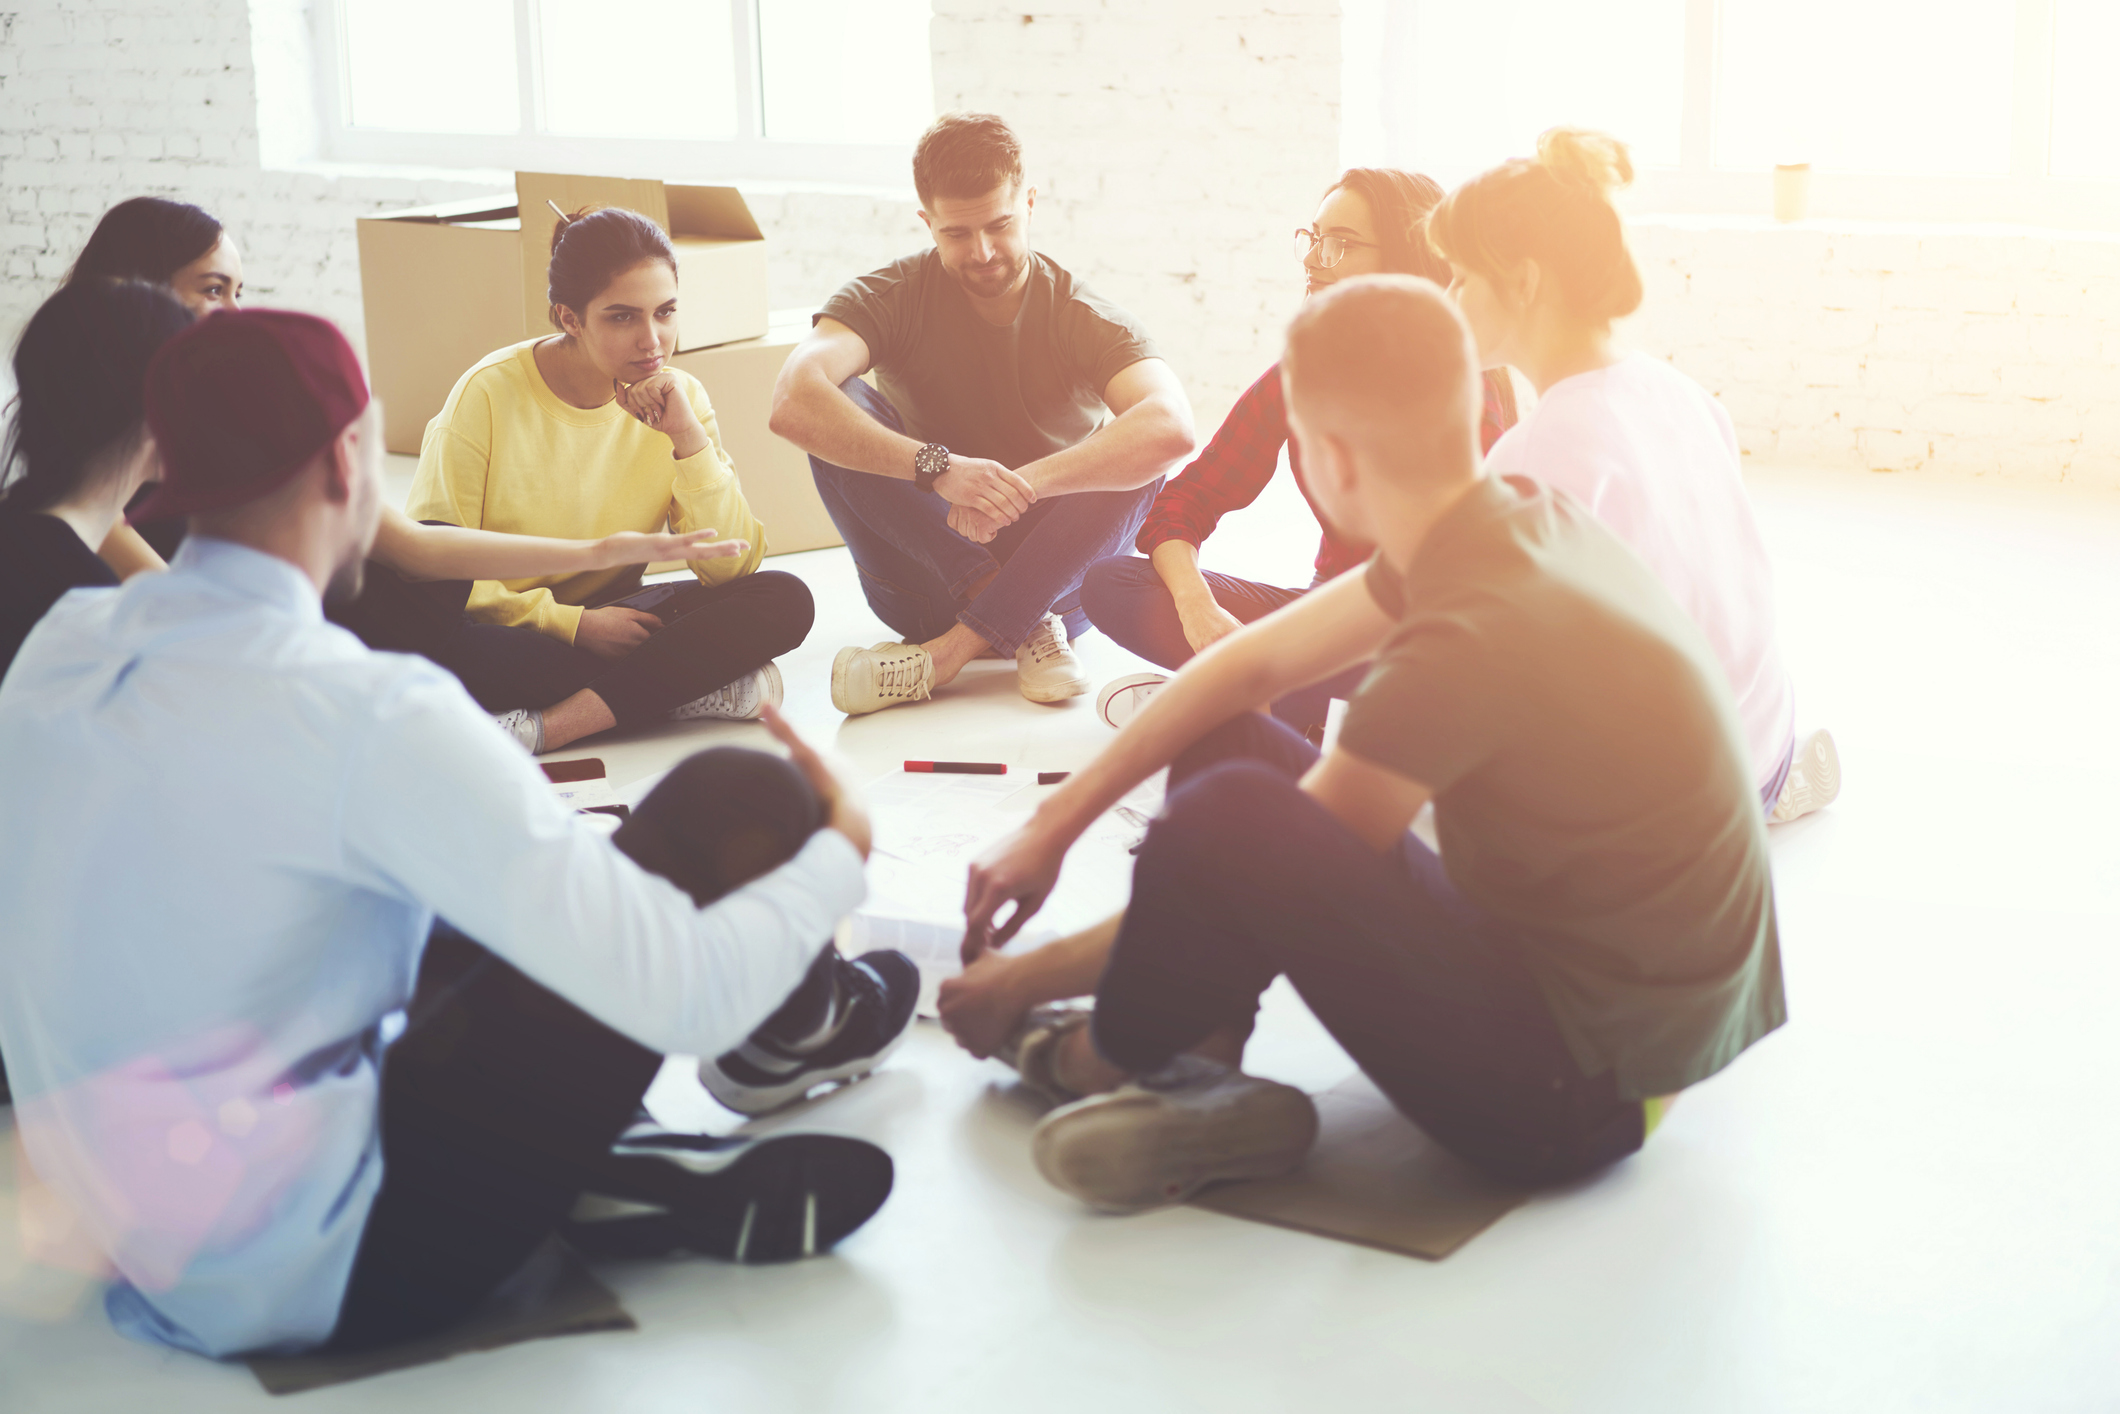 A group of young adults sitting in a circle on the floor, engaged in a collaborative discussion in a bright, spacious room.